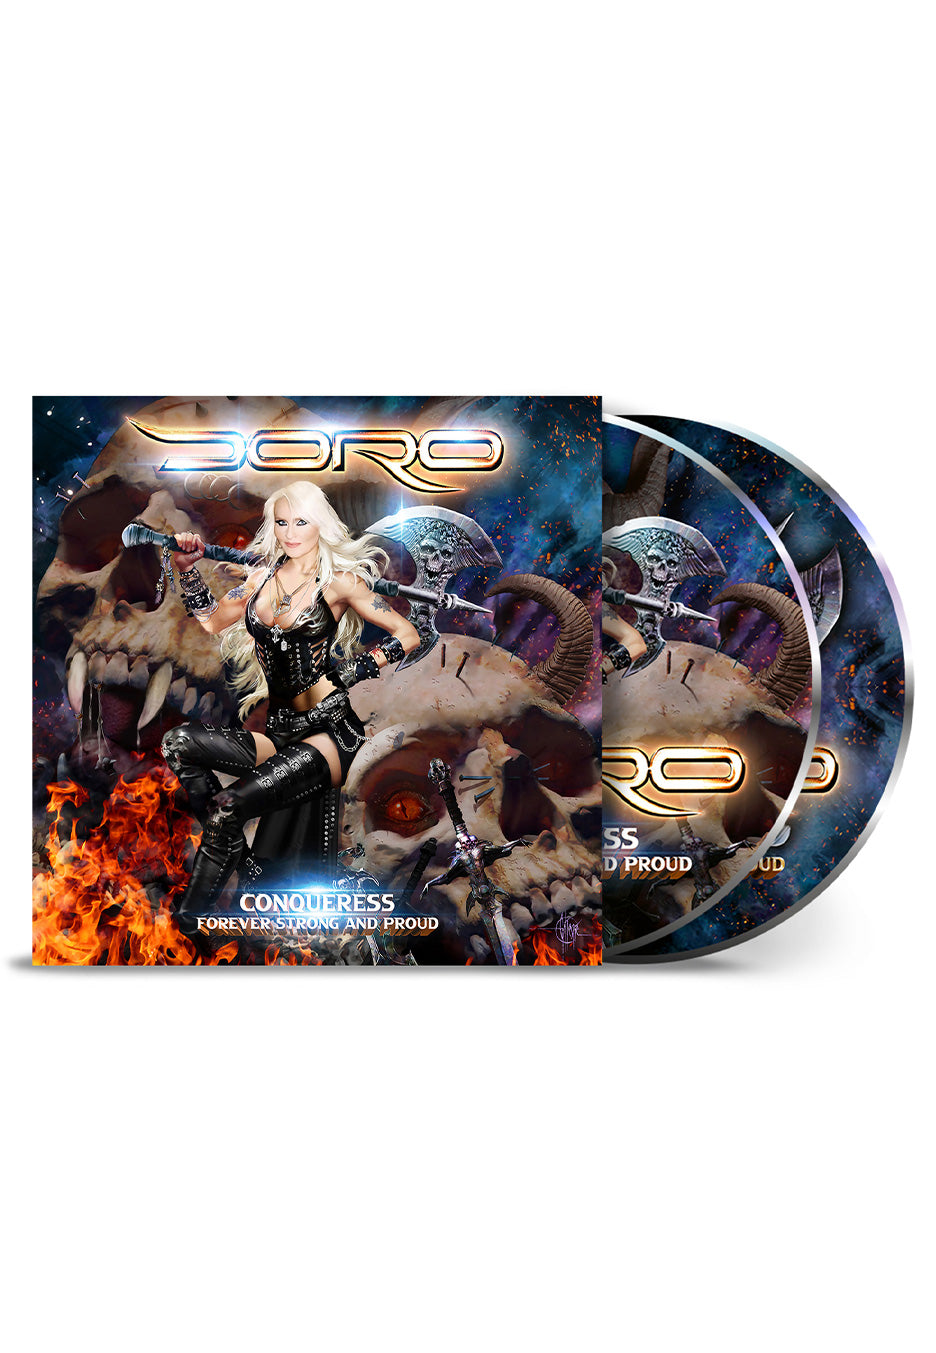 Doro - Conqueress - Forever Strong And Proud - Digibook 2 CD